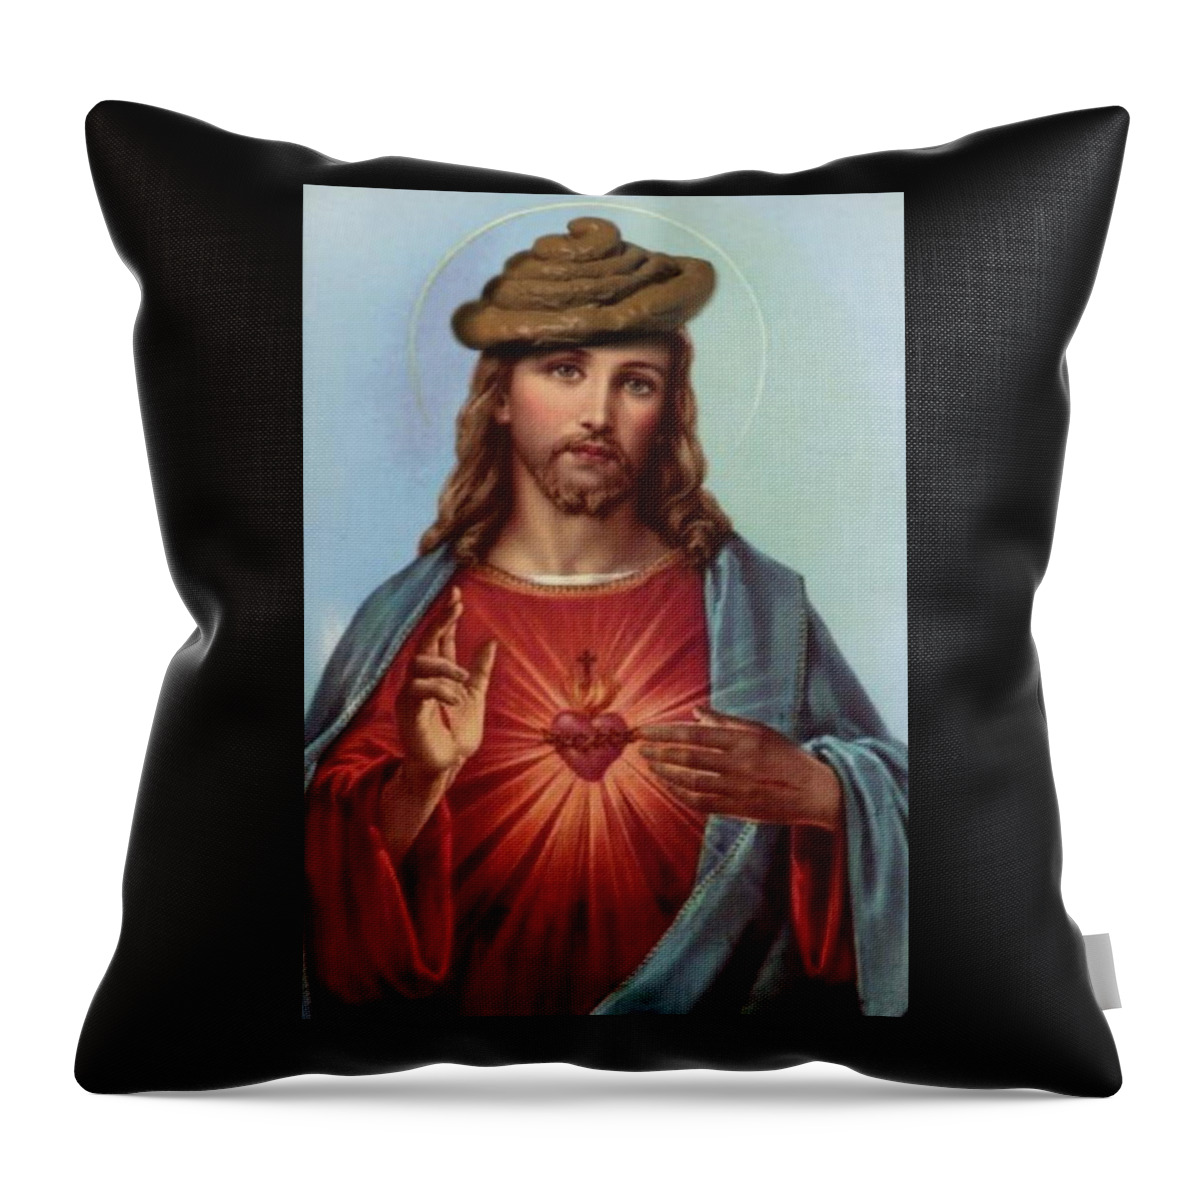 Jesus Throw Pillow featuring the digital art Jesus In A Poop Hat by Ryan Almighty